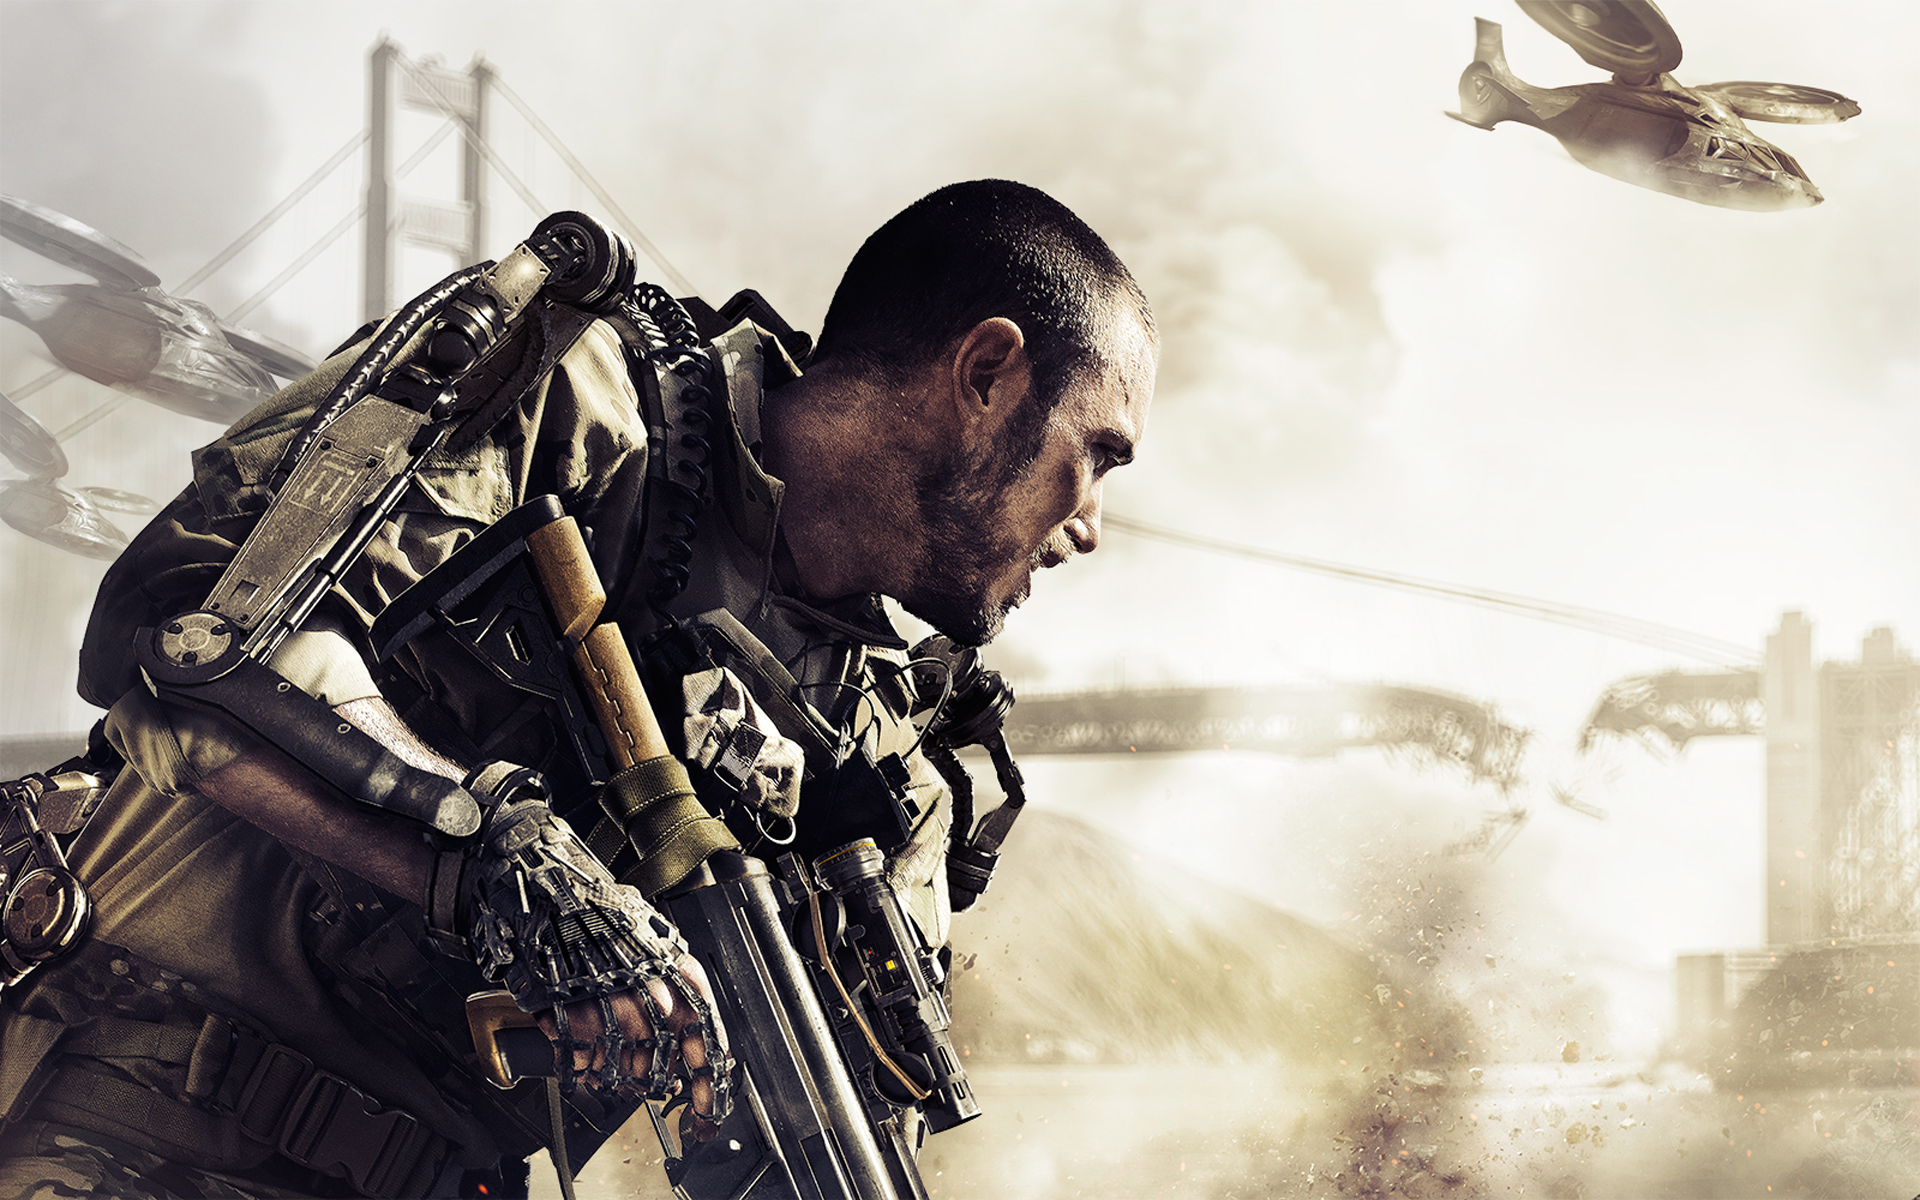 Geek insider, geekinsider, geekinsider. Com,, call of duty: advanced warfare multiplayer reveal and opinions, gaming